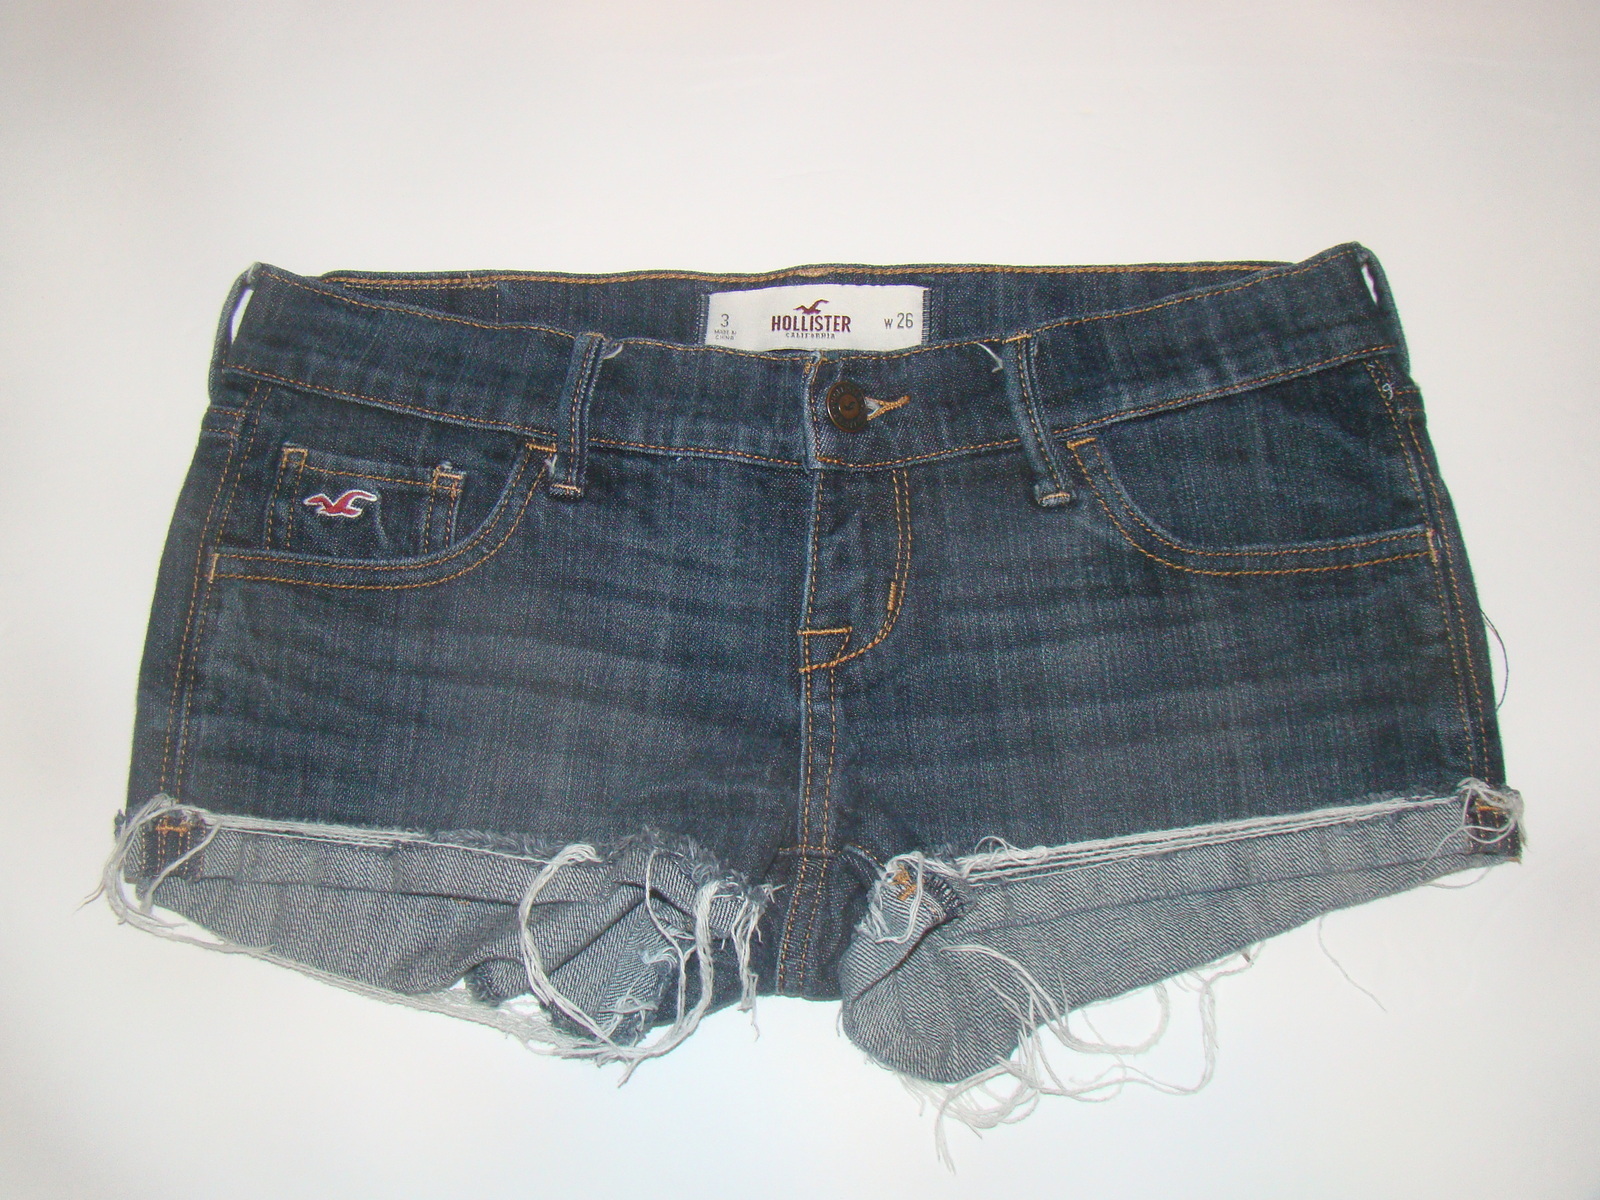 Primary image for HOLLISTER - Size 3, w26 - Woman's Denim Shorts